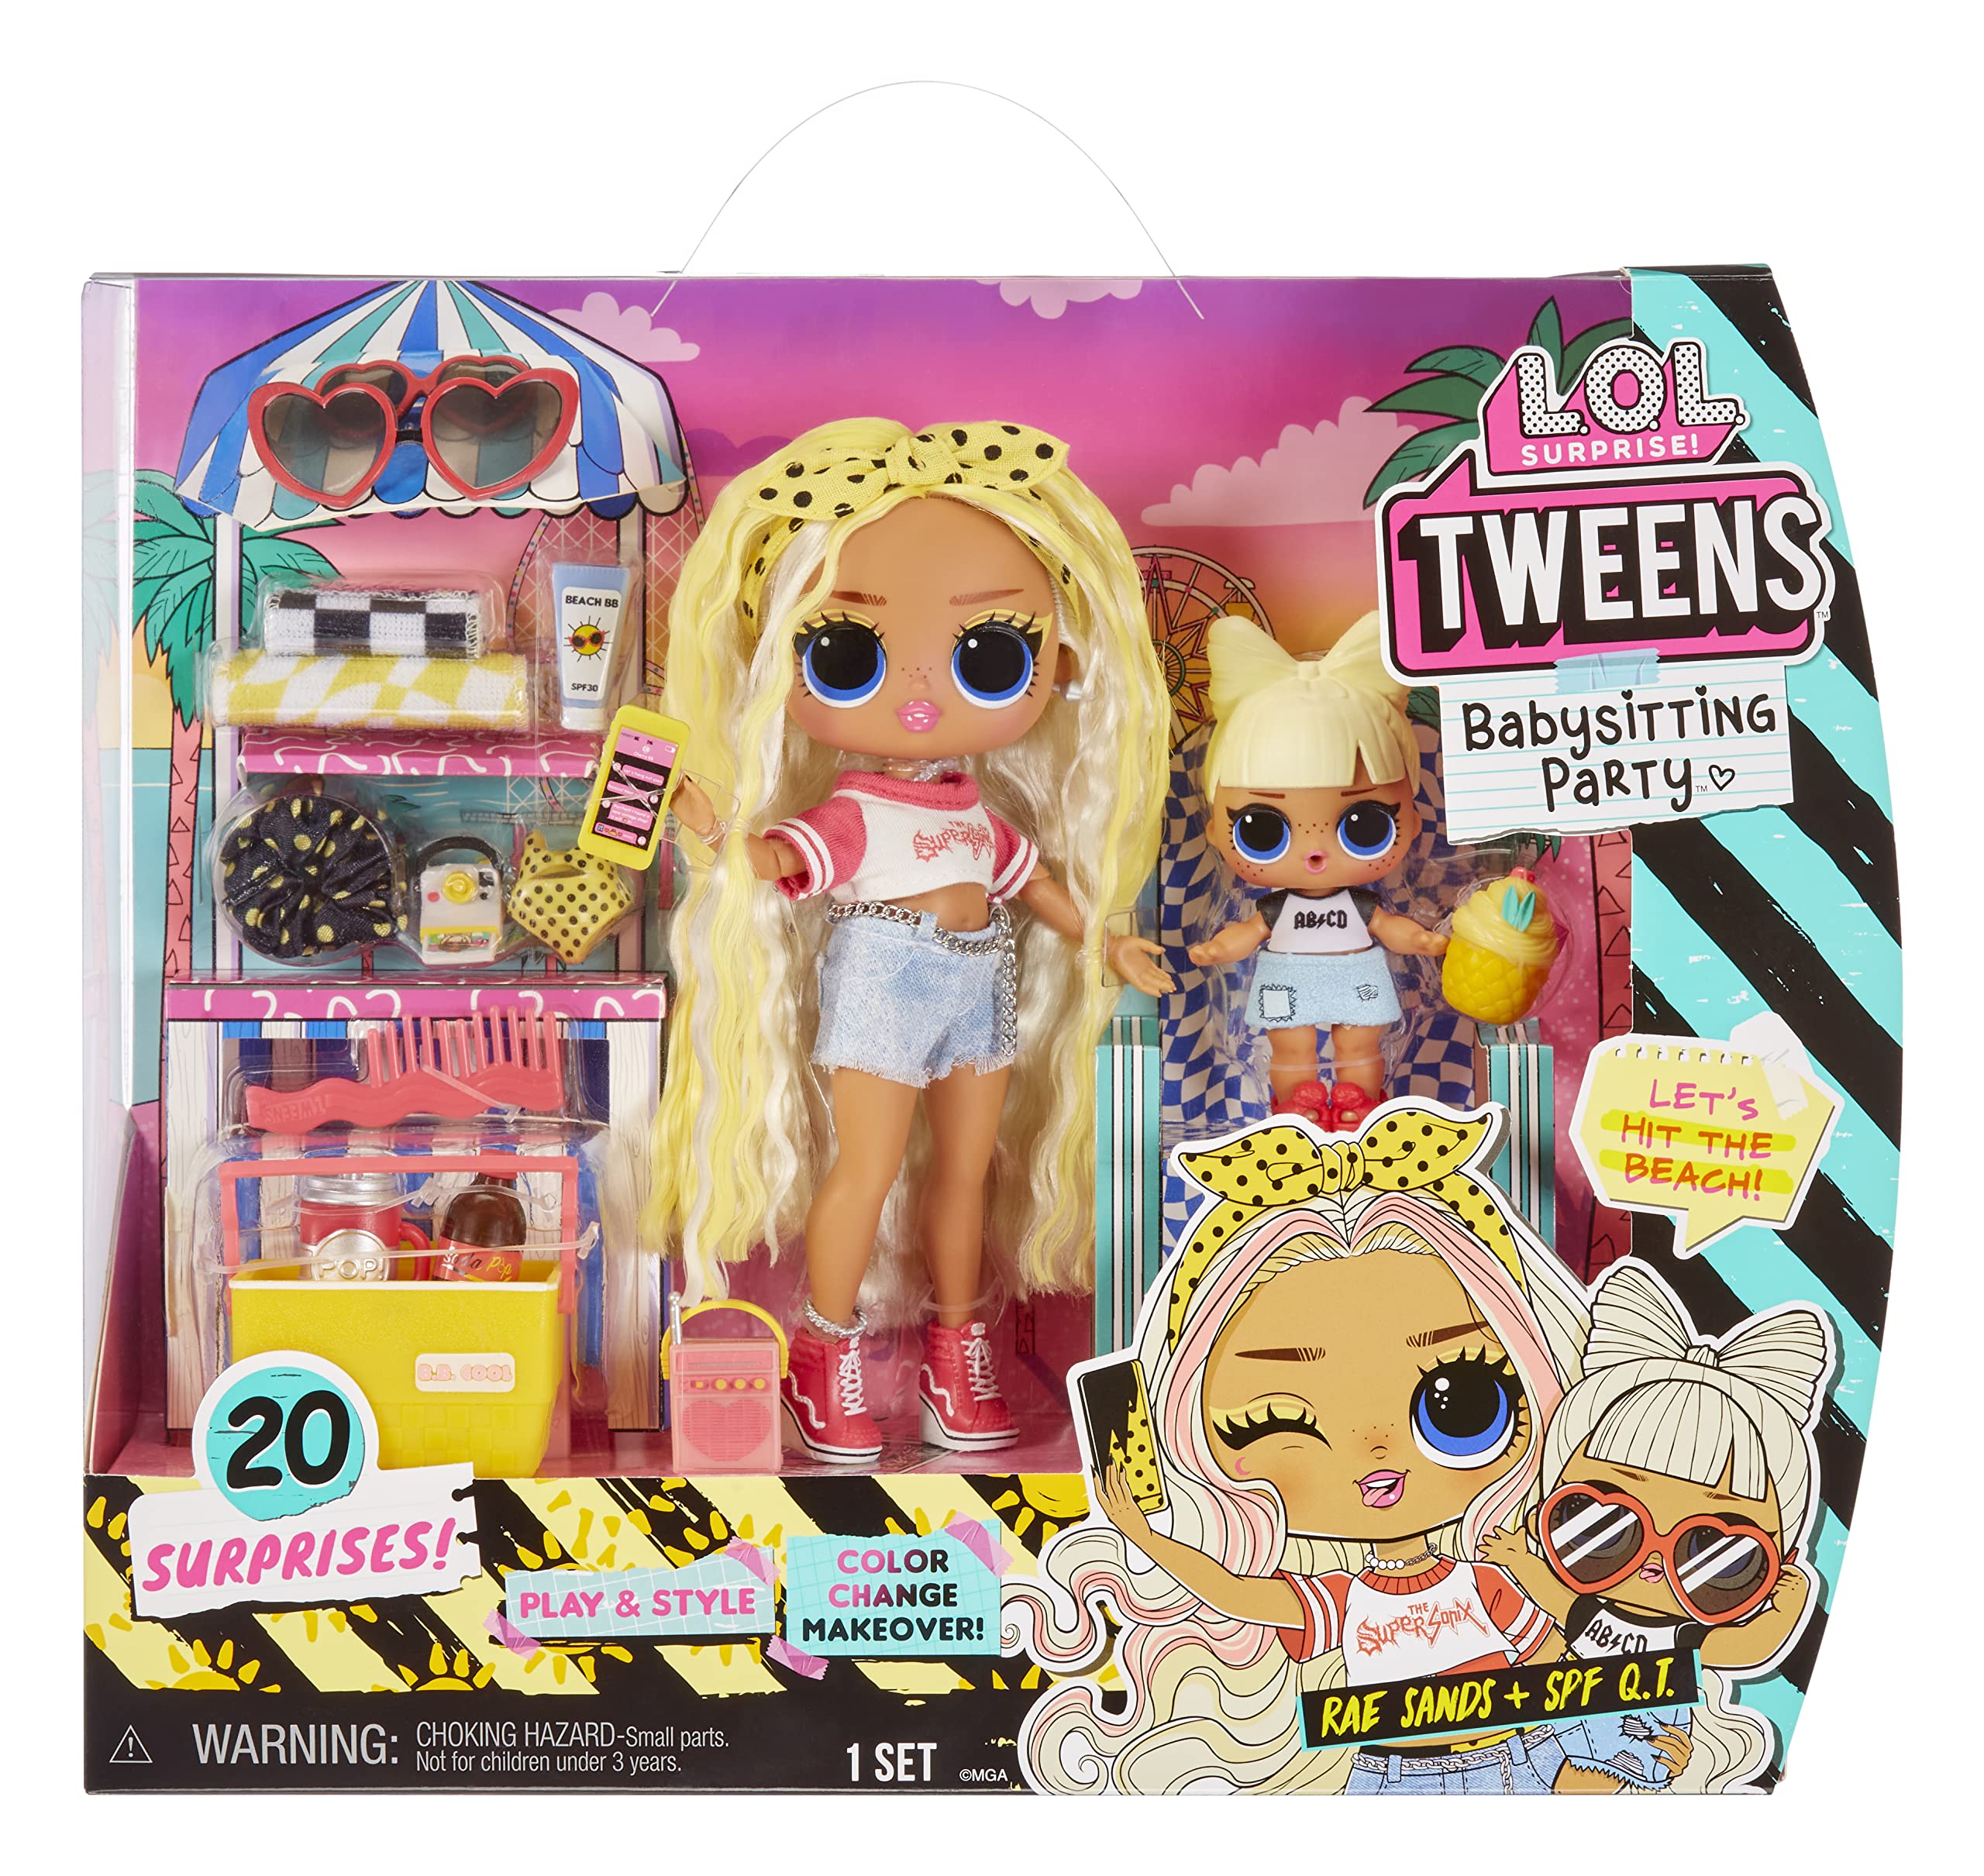 L.O.L. Surprise Tweens Babysitting Beach Party with 20 Surprises Including Color Change Features and 2 Dolls Great Gift